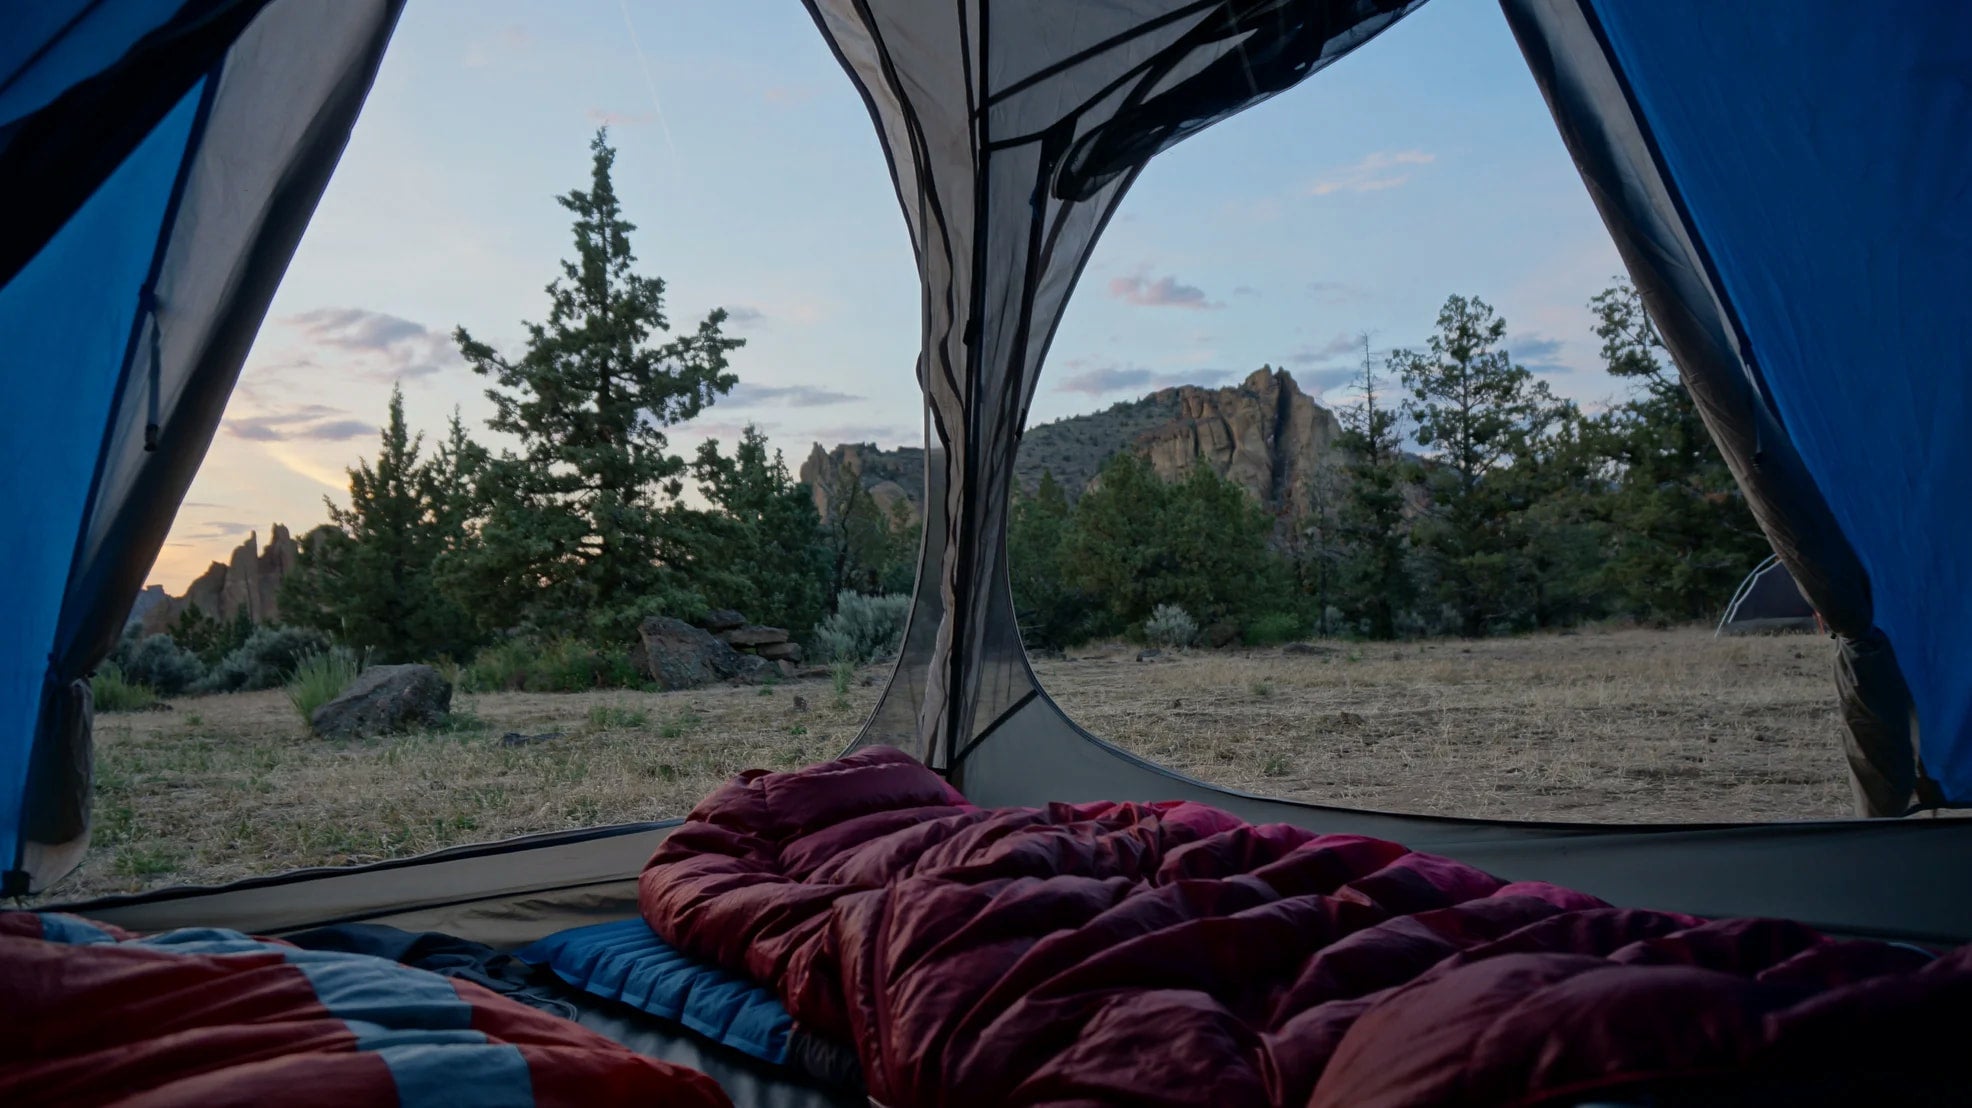 View from inside a tent overlooking the rock formations at smith rock state park at dusk.